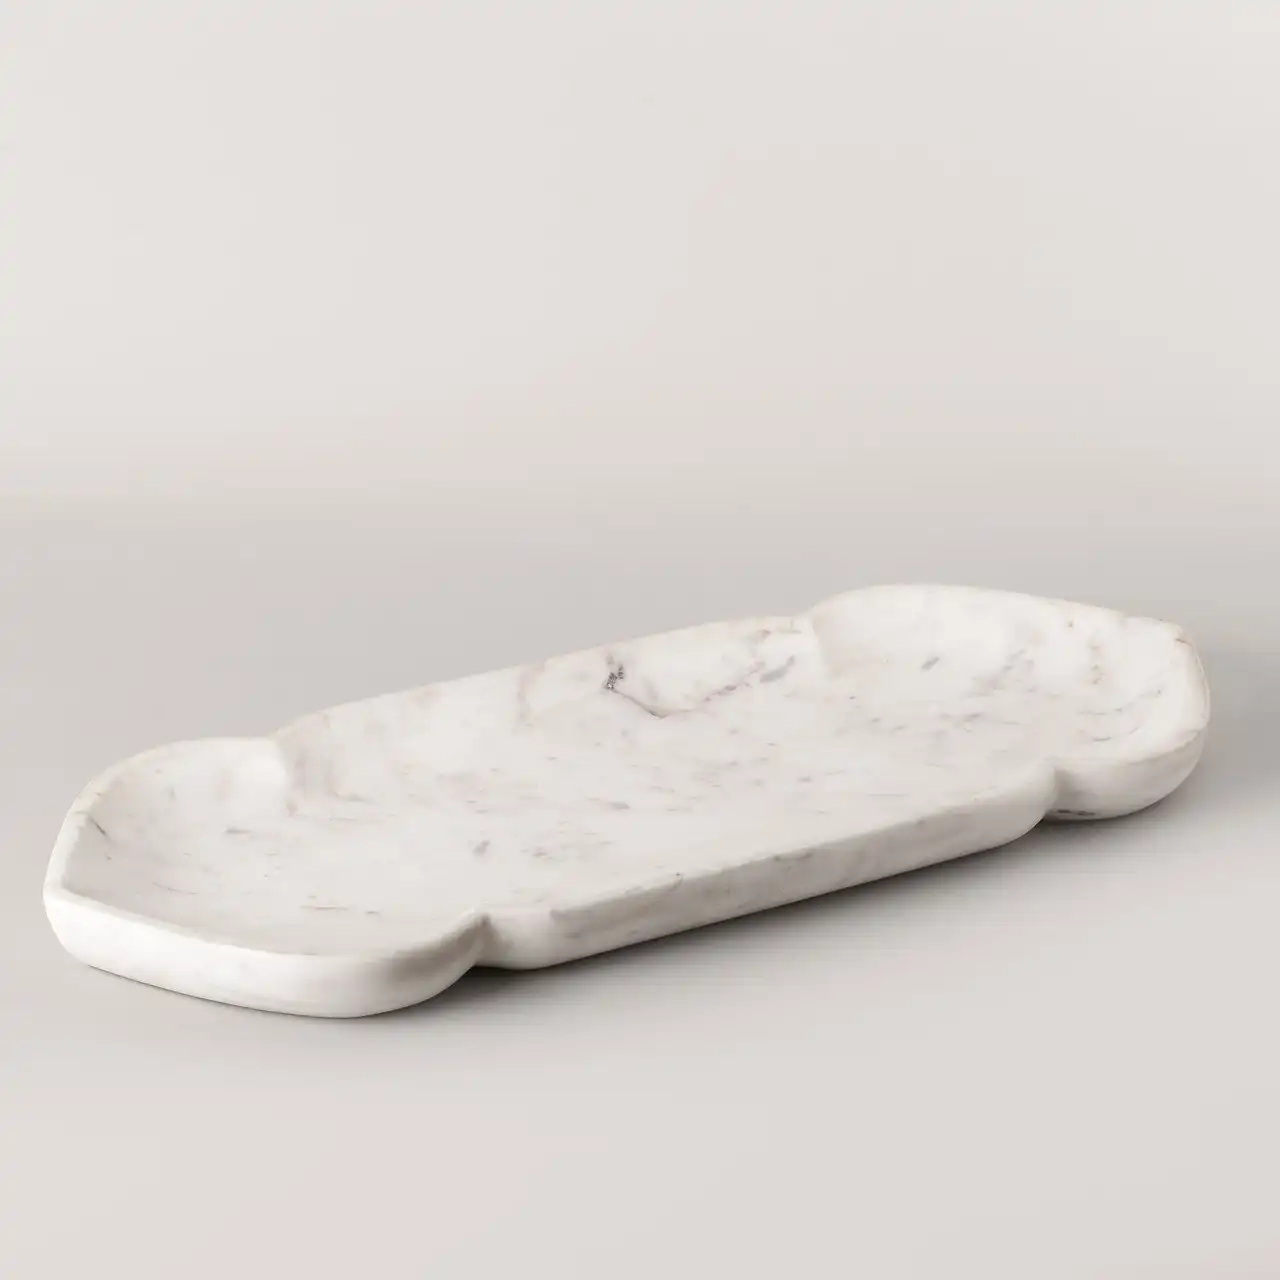 Compass Imports Marble Mishka Tray in White